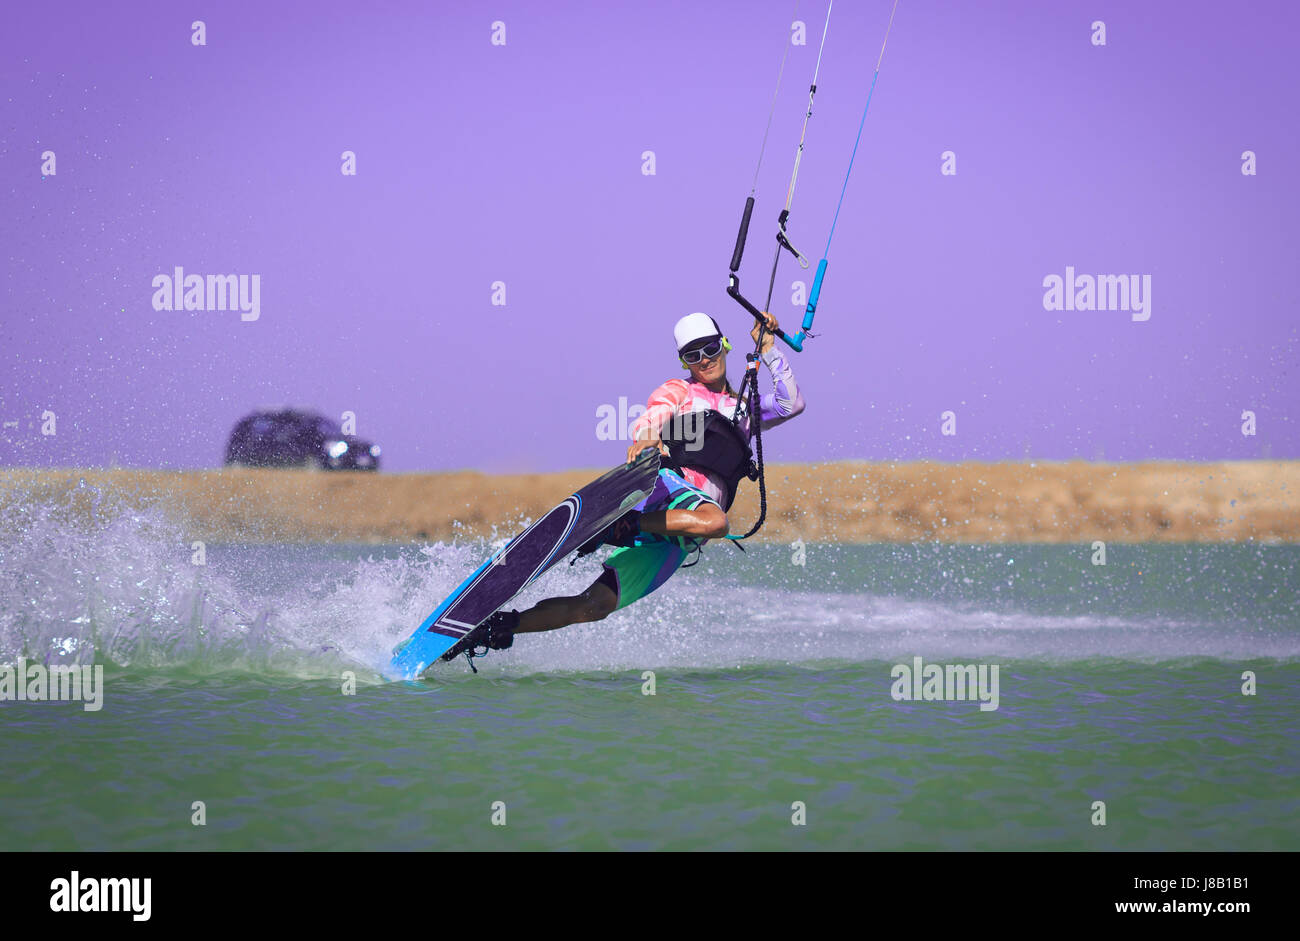 Kite surfer rides ideal flat water of the lake lagoon with kite flying in sky making slide trick. Recreation activity and active extreme water sports Stock Photo